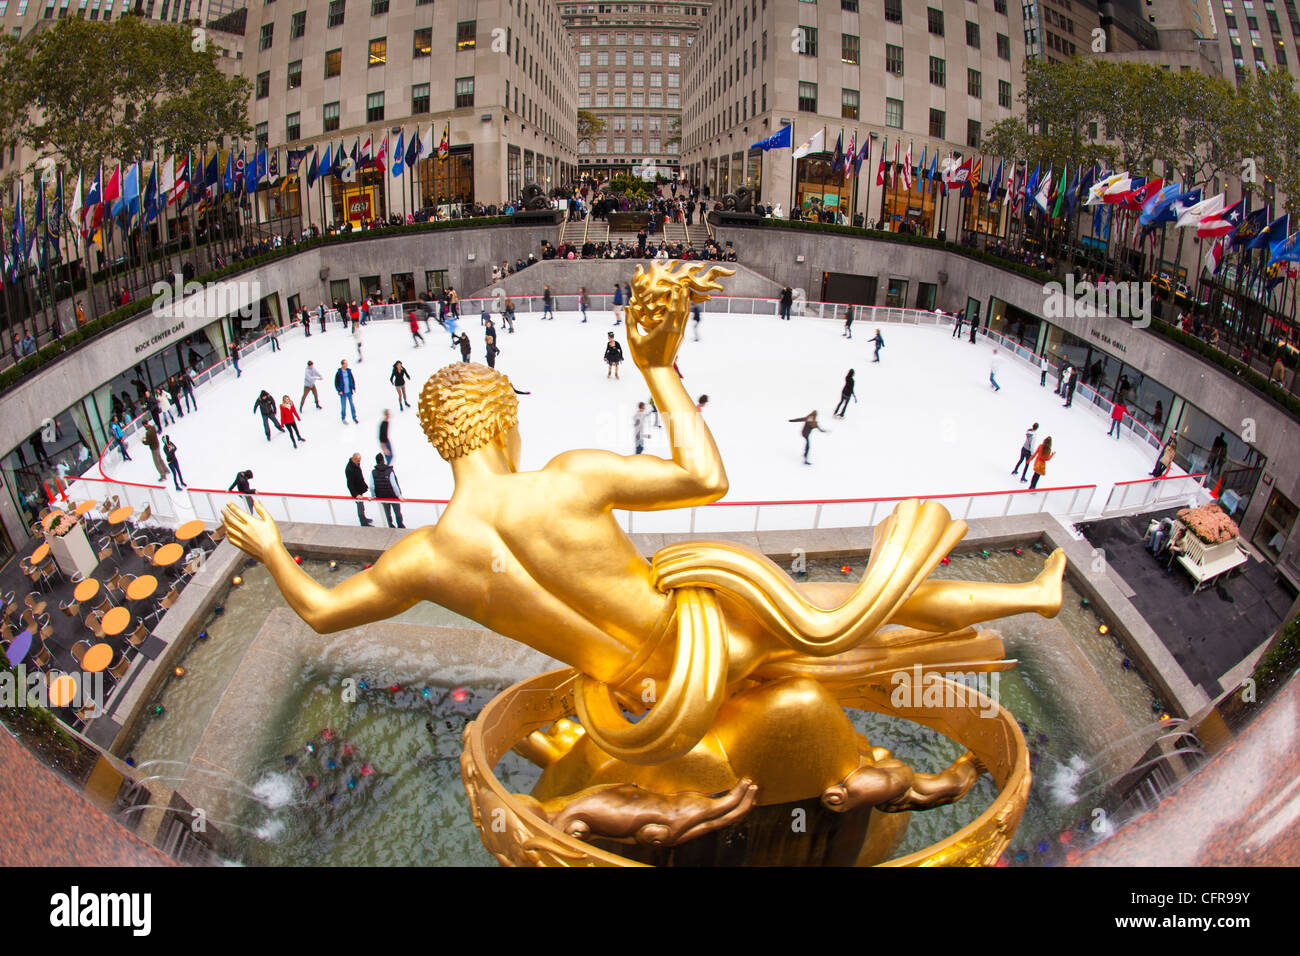 Ice skating rink below the Rockefeller Centre, New York, United States of America, North America Stock Photo